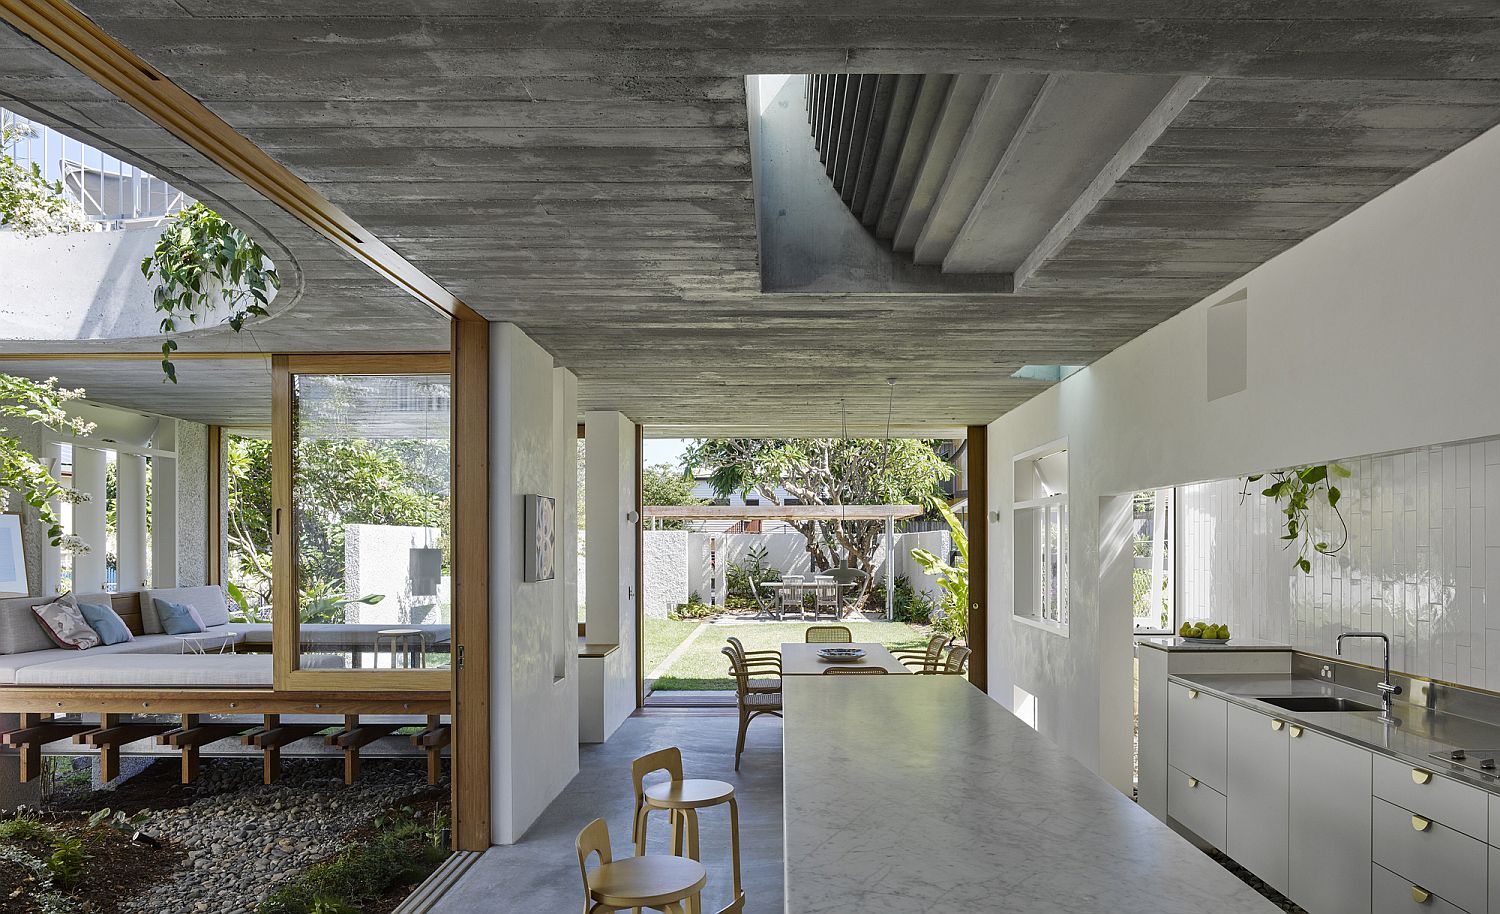 Series of concrete walls and smart extensions shape the new interior of the Gibbon Street